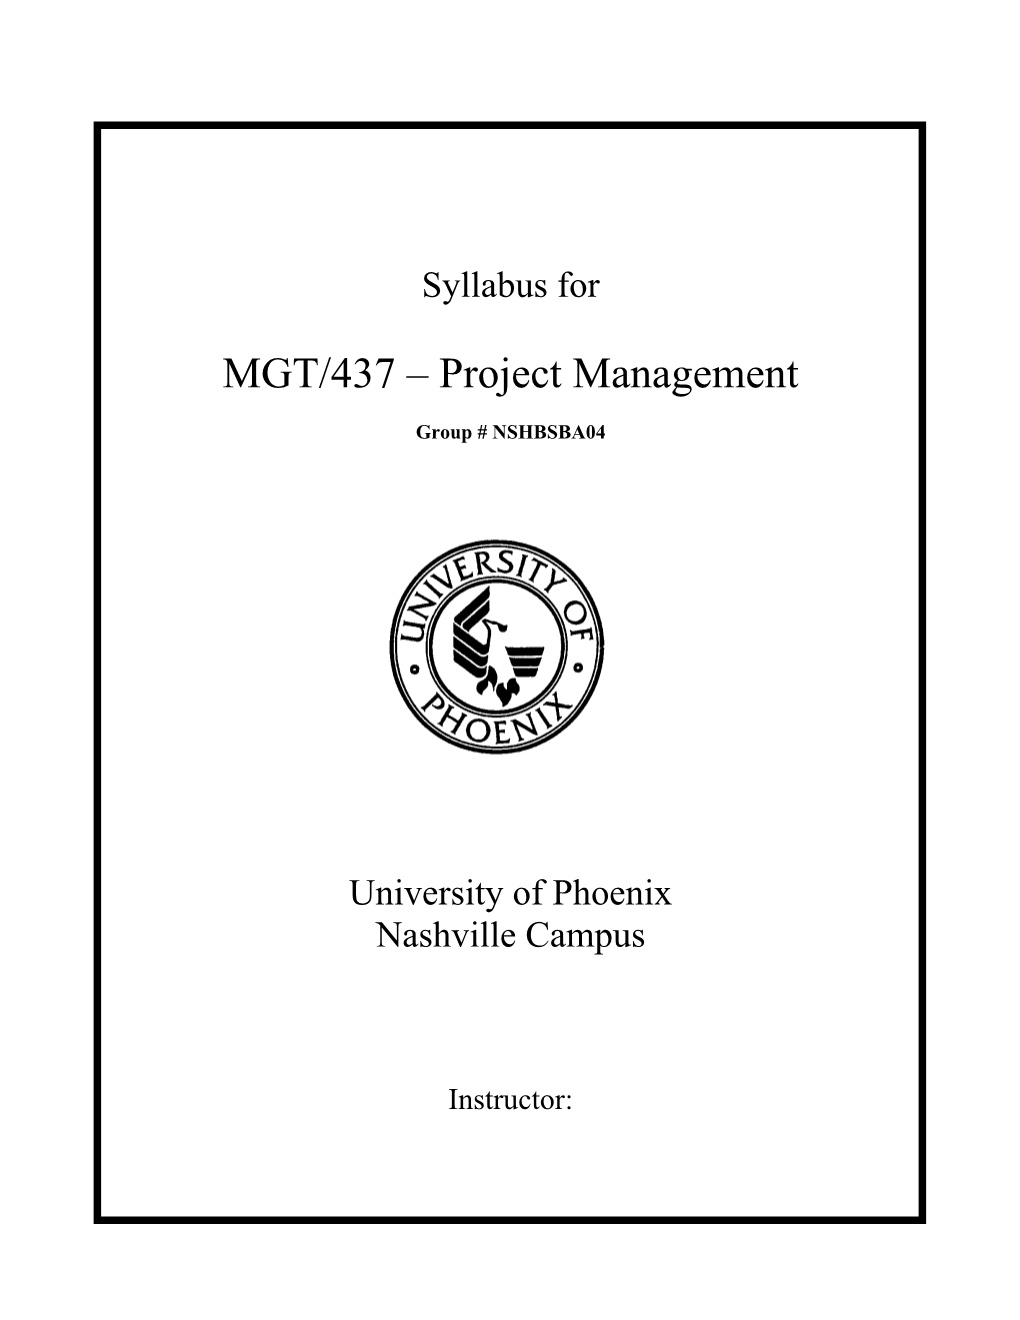 MGT/437 Project Management